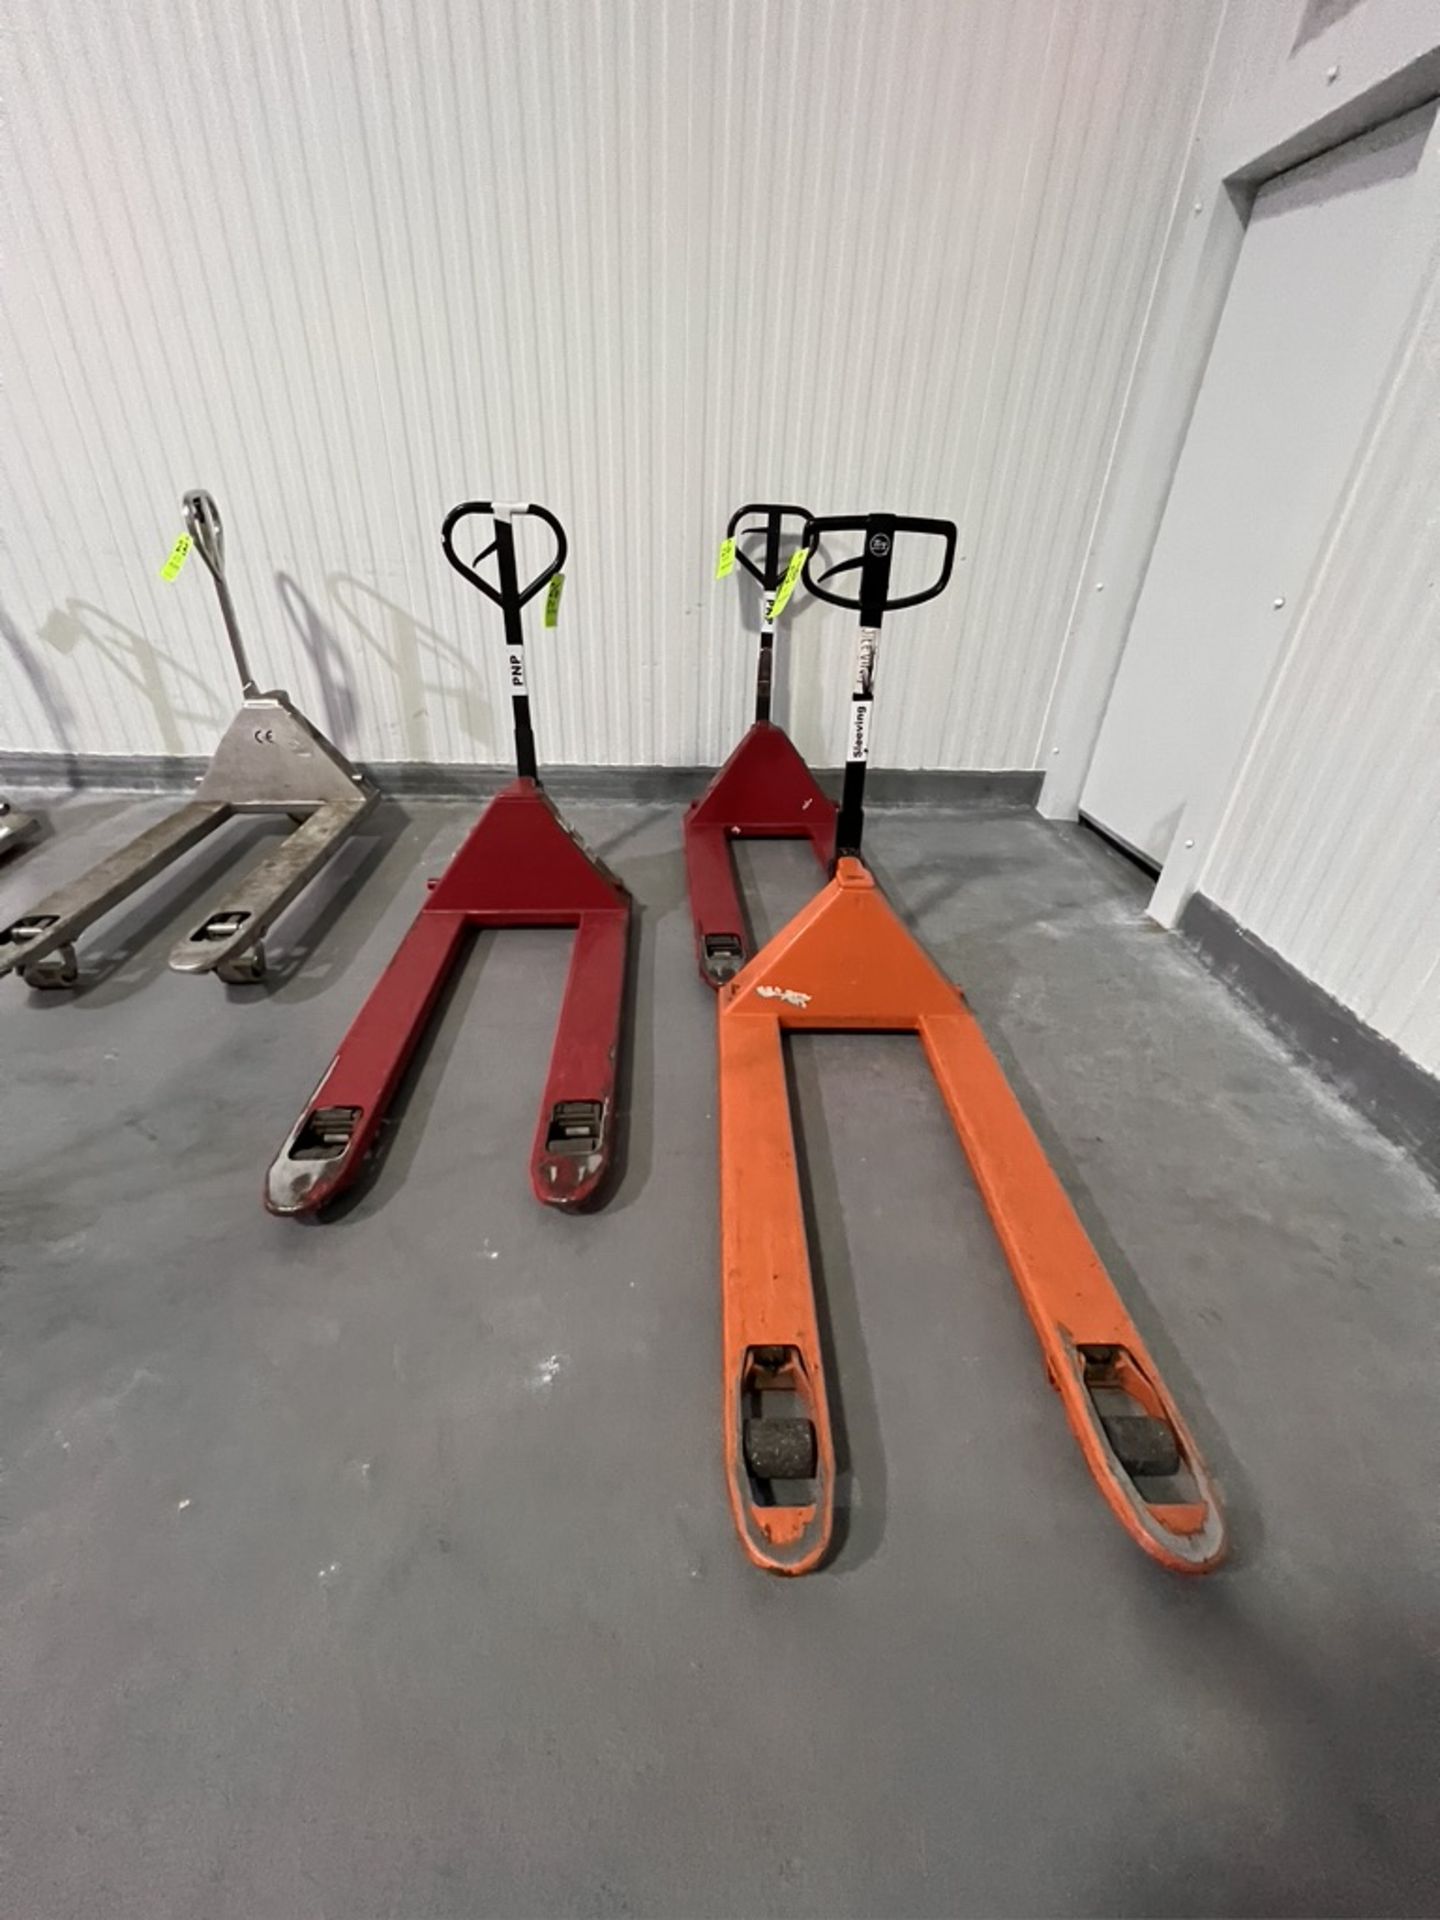 (3) ULINE PNEUMATIC PALLET JACKS (RIGGING & SIMPLE LOADING FEE $25.00) (NOTE: DOES NOT INCLUDE